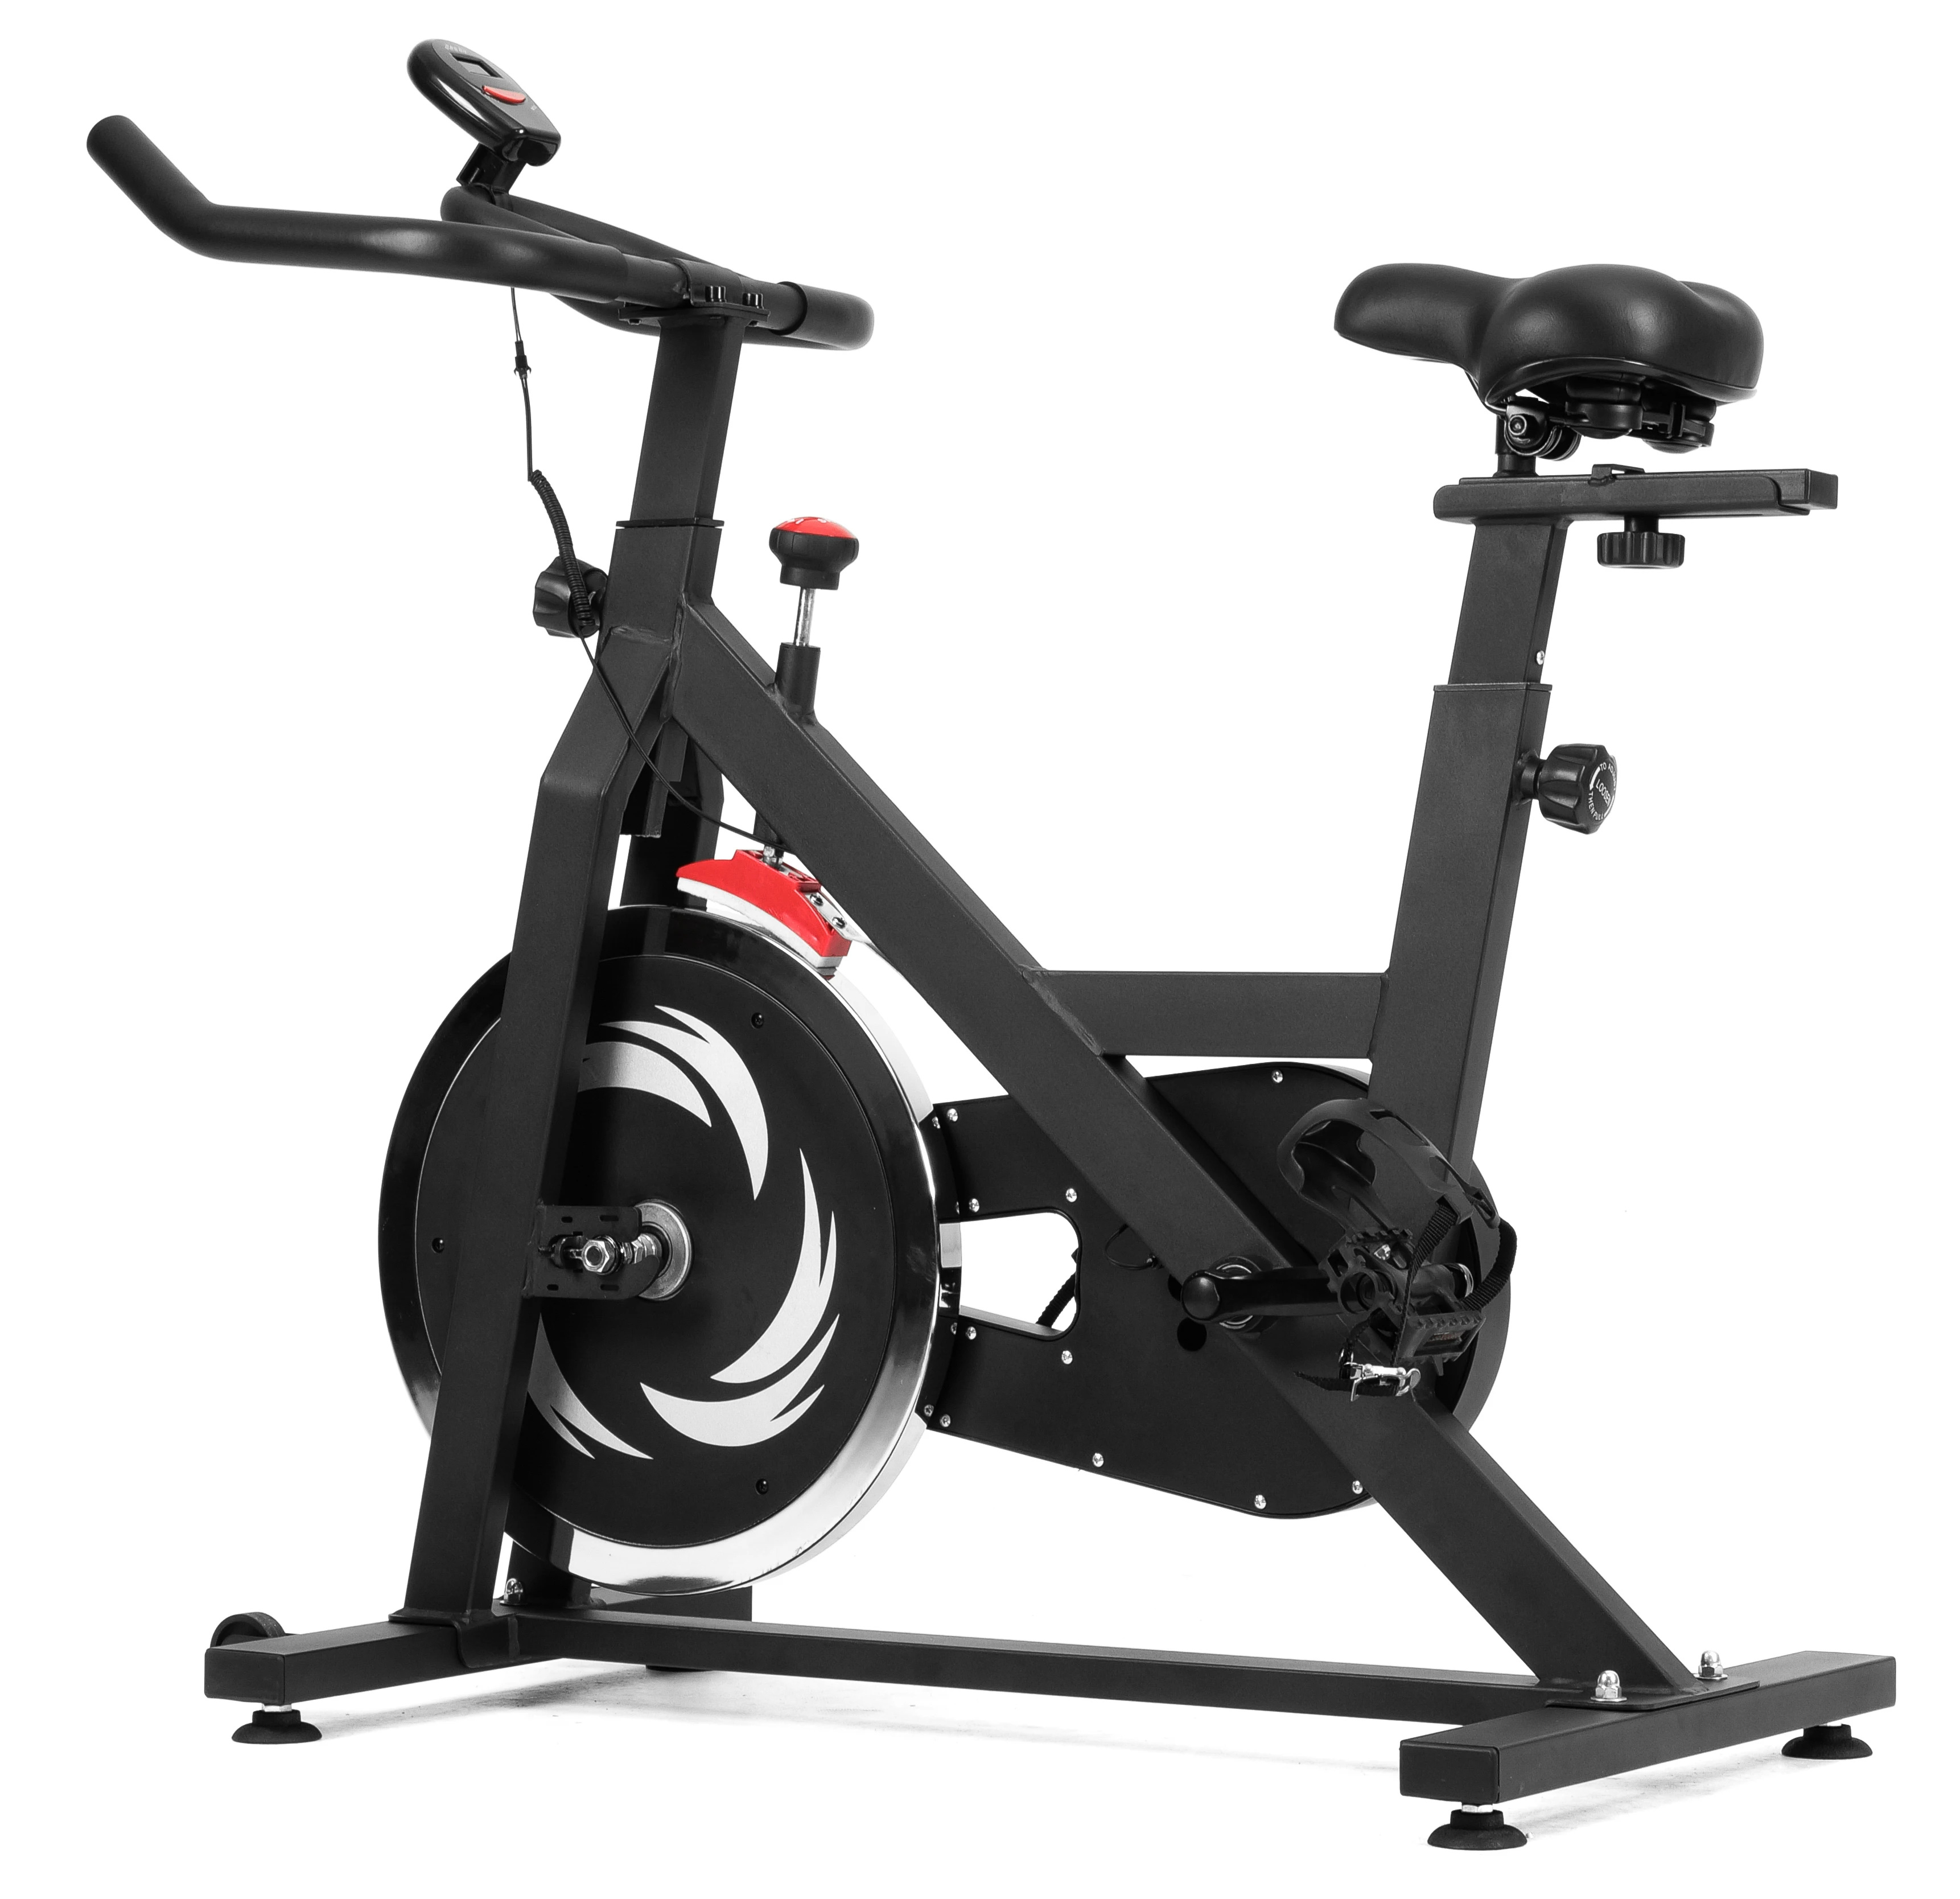 

Hot Sale Fitness Spin Bike Spinning Bicycle Wholesale Home Used Machine Equipment Spin Bike